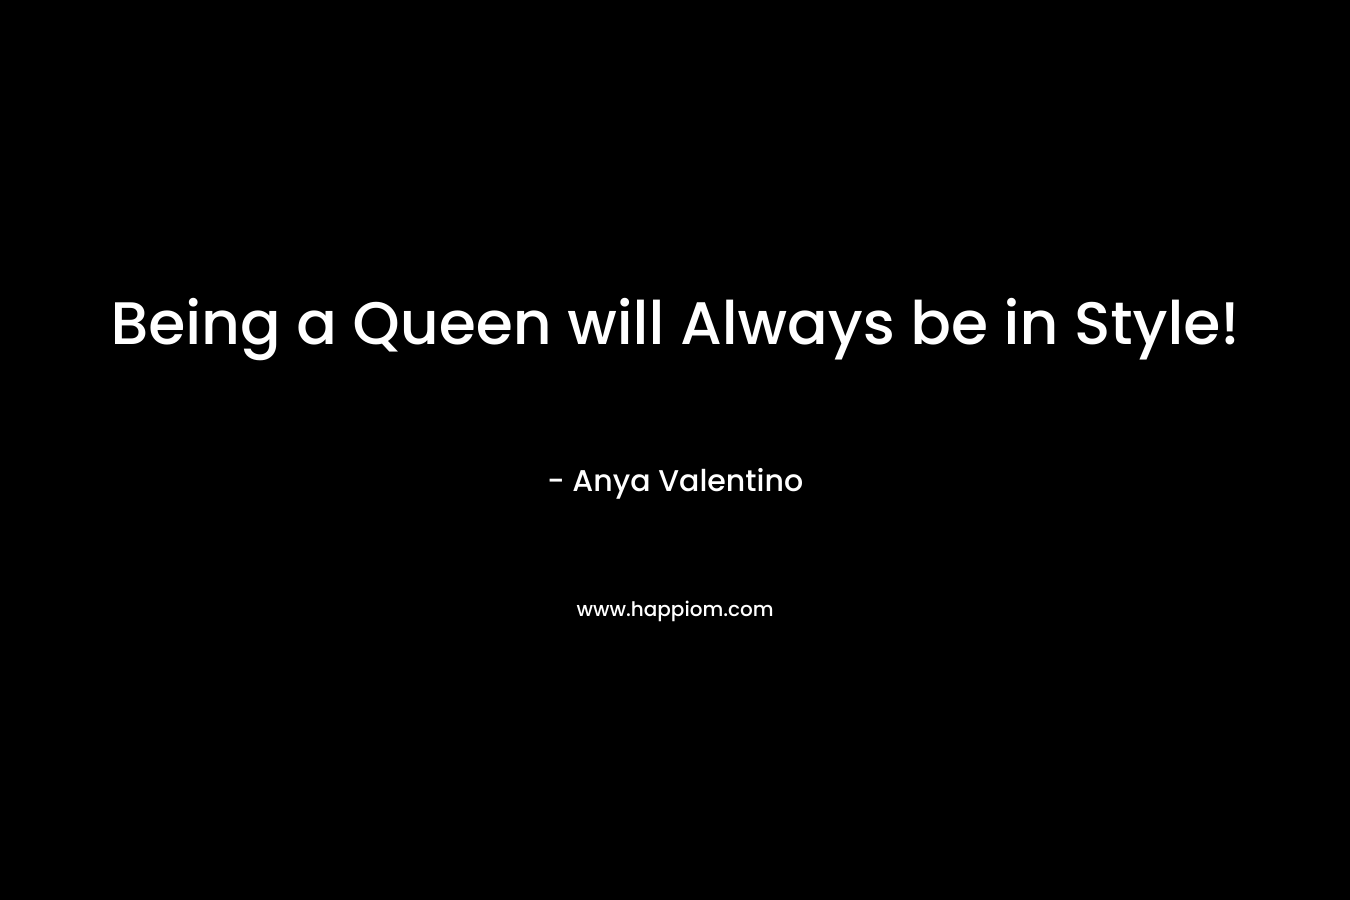 Being a Queen will Always be in Style! – Anya Valentino